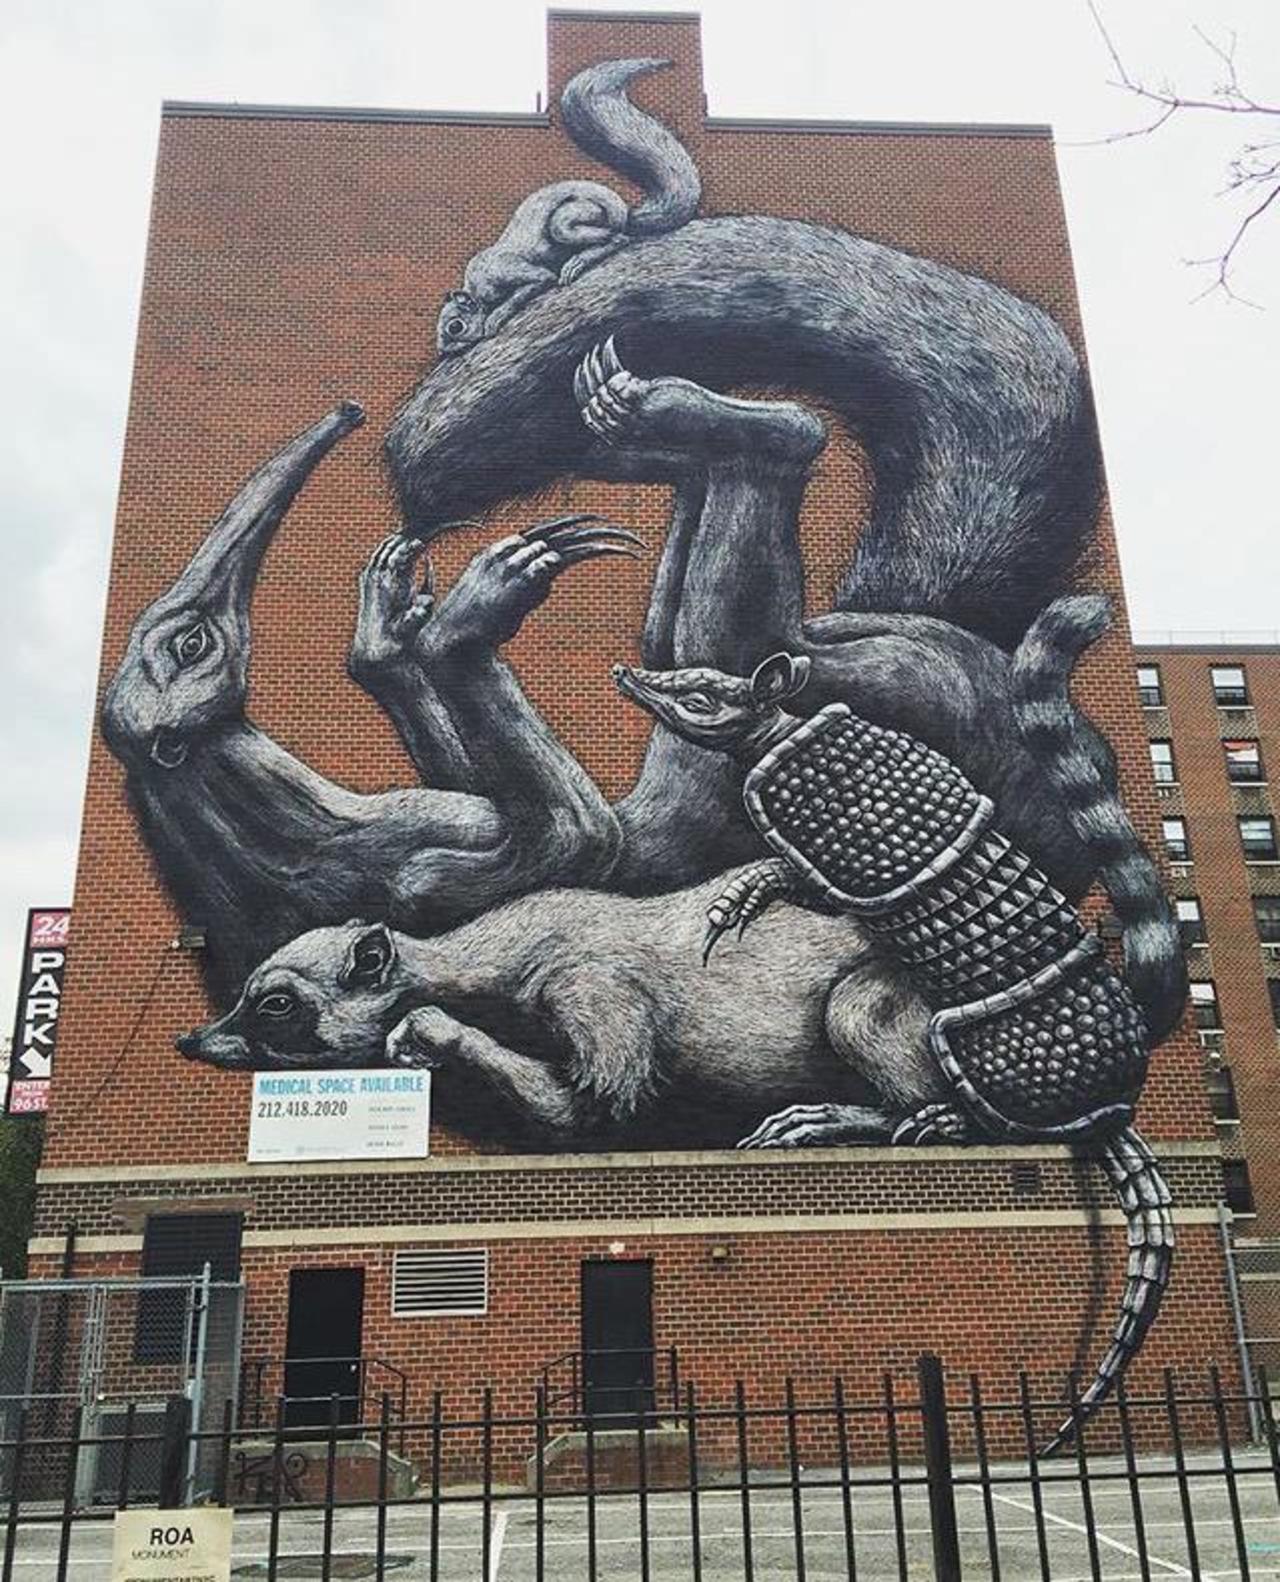 The completed new large scale Street Art wall by ROA in NYC

#art #graffiti #mural #streetart http://t.co/93xor7wtRf